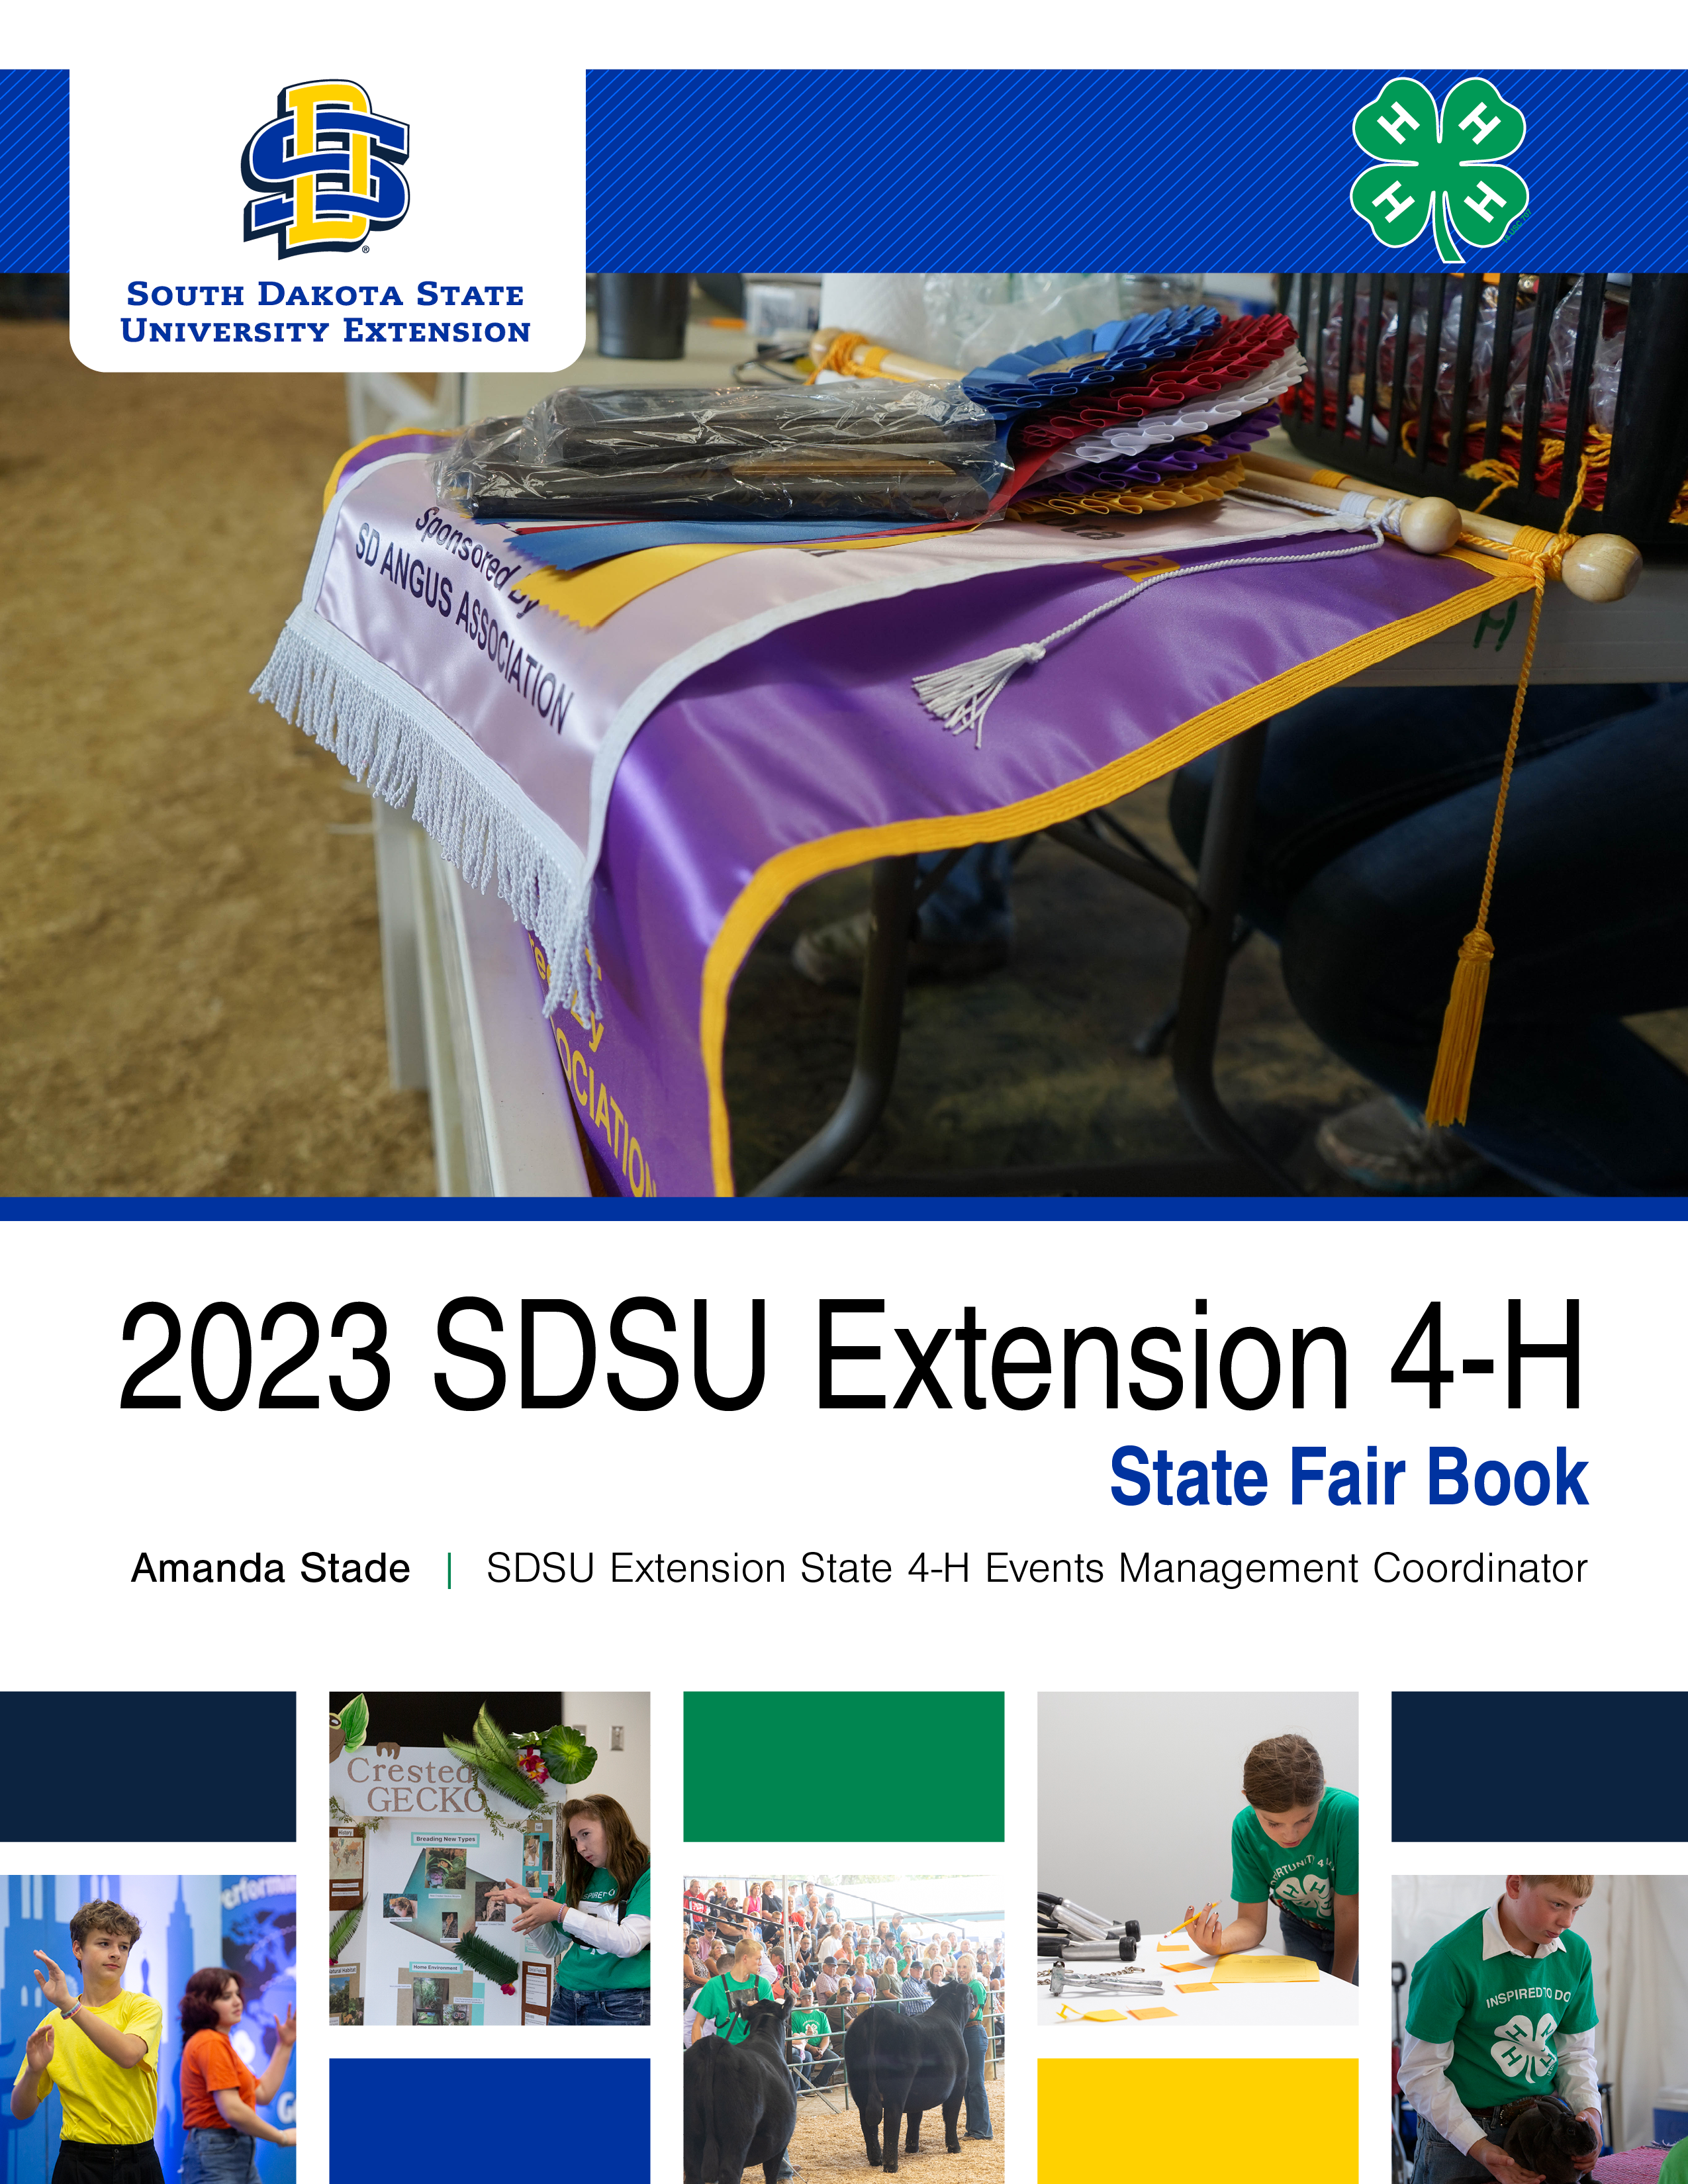 Cover of the 2023 SDSU Extension 4-H State Fair Book